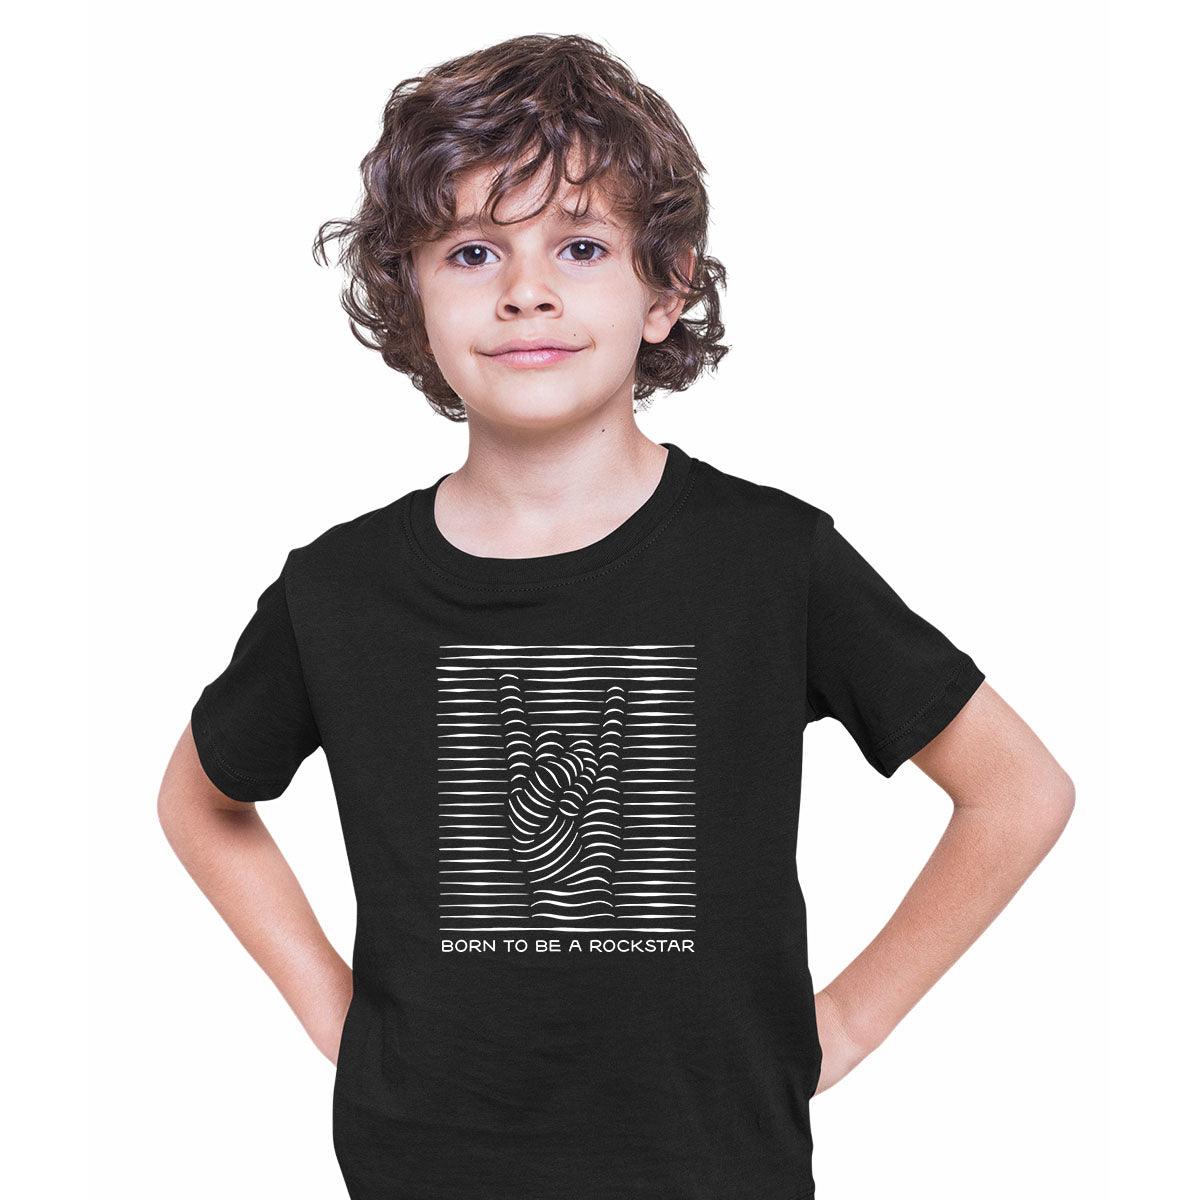 Born to be a rockstar Abstract Typography T-shirt for Kids - Kuzi Tees